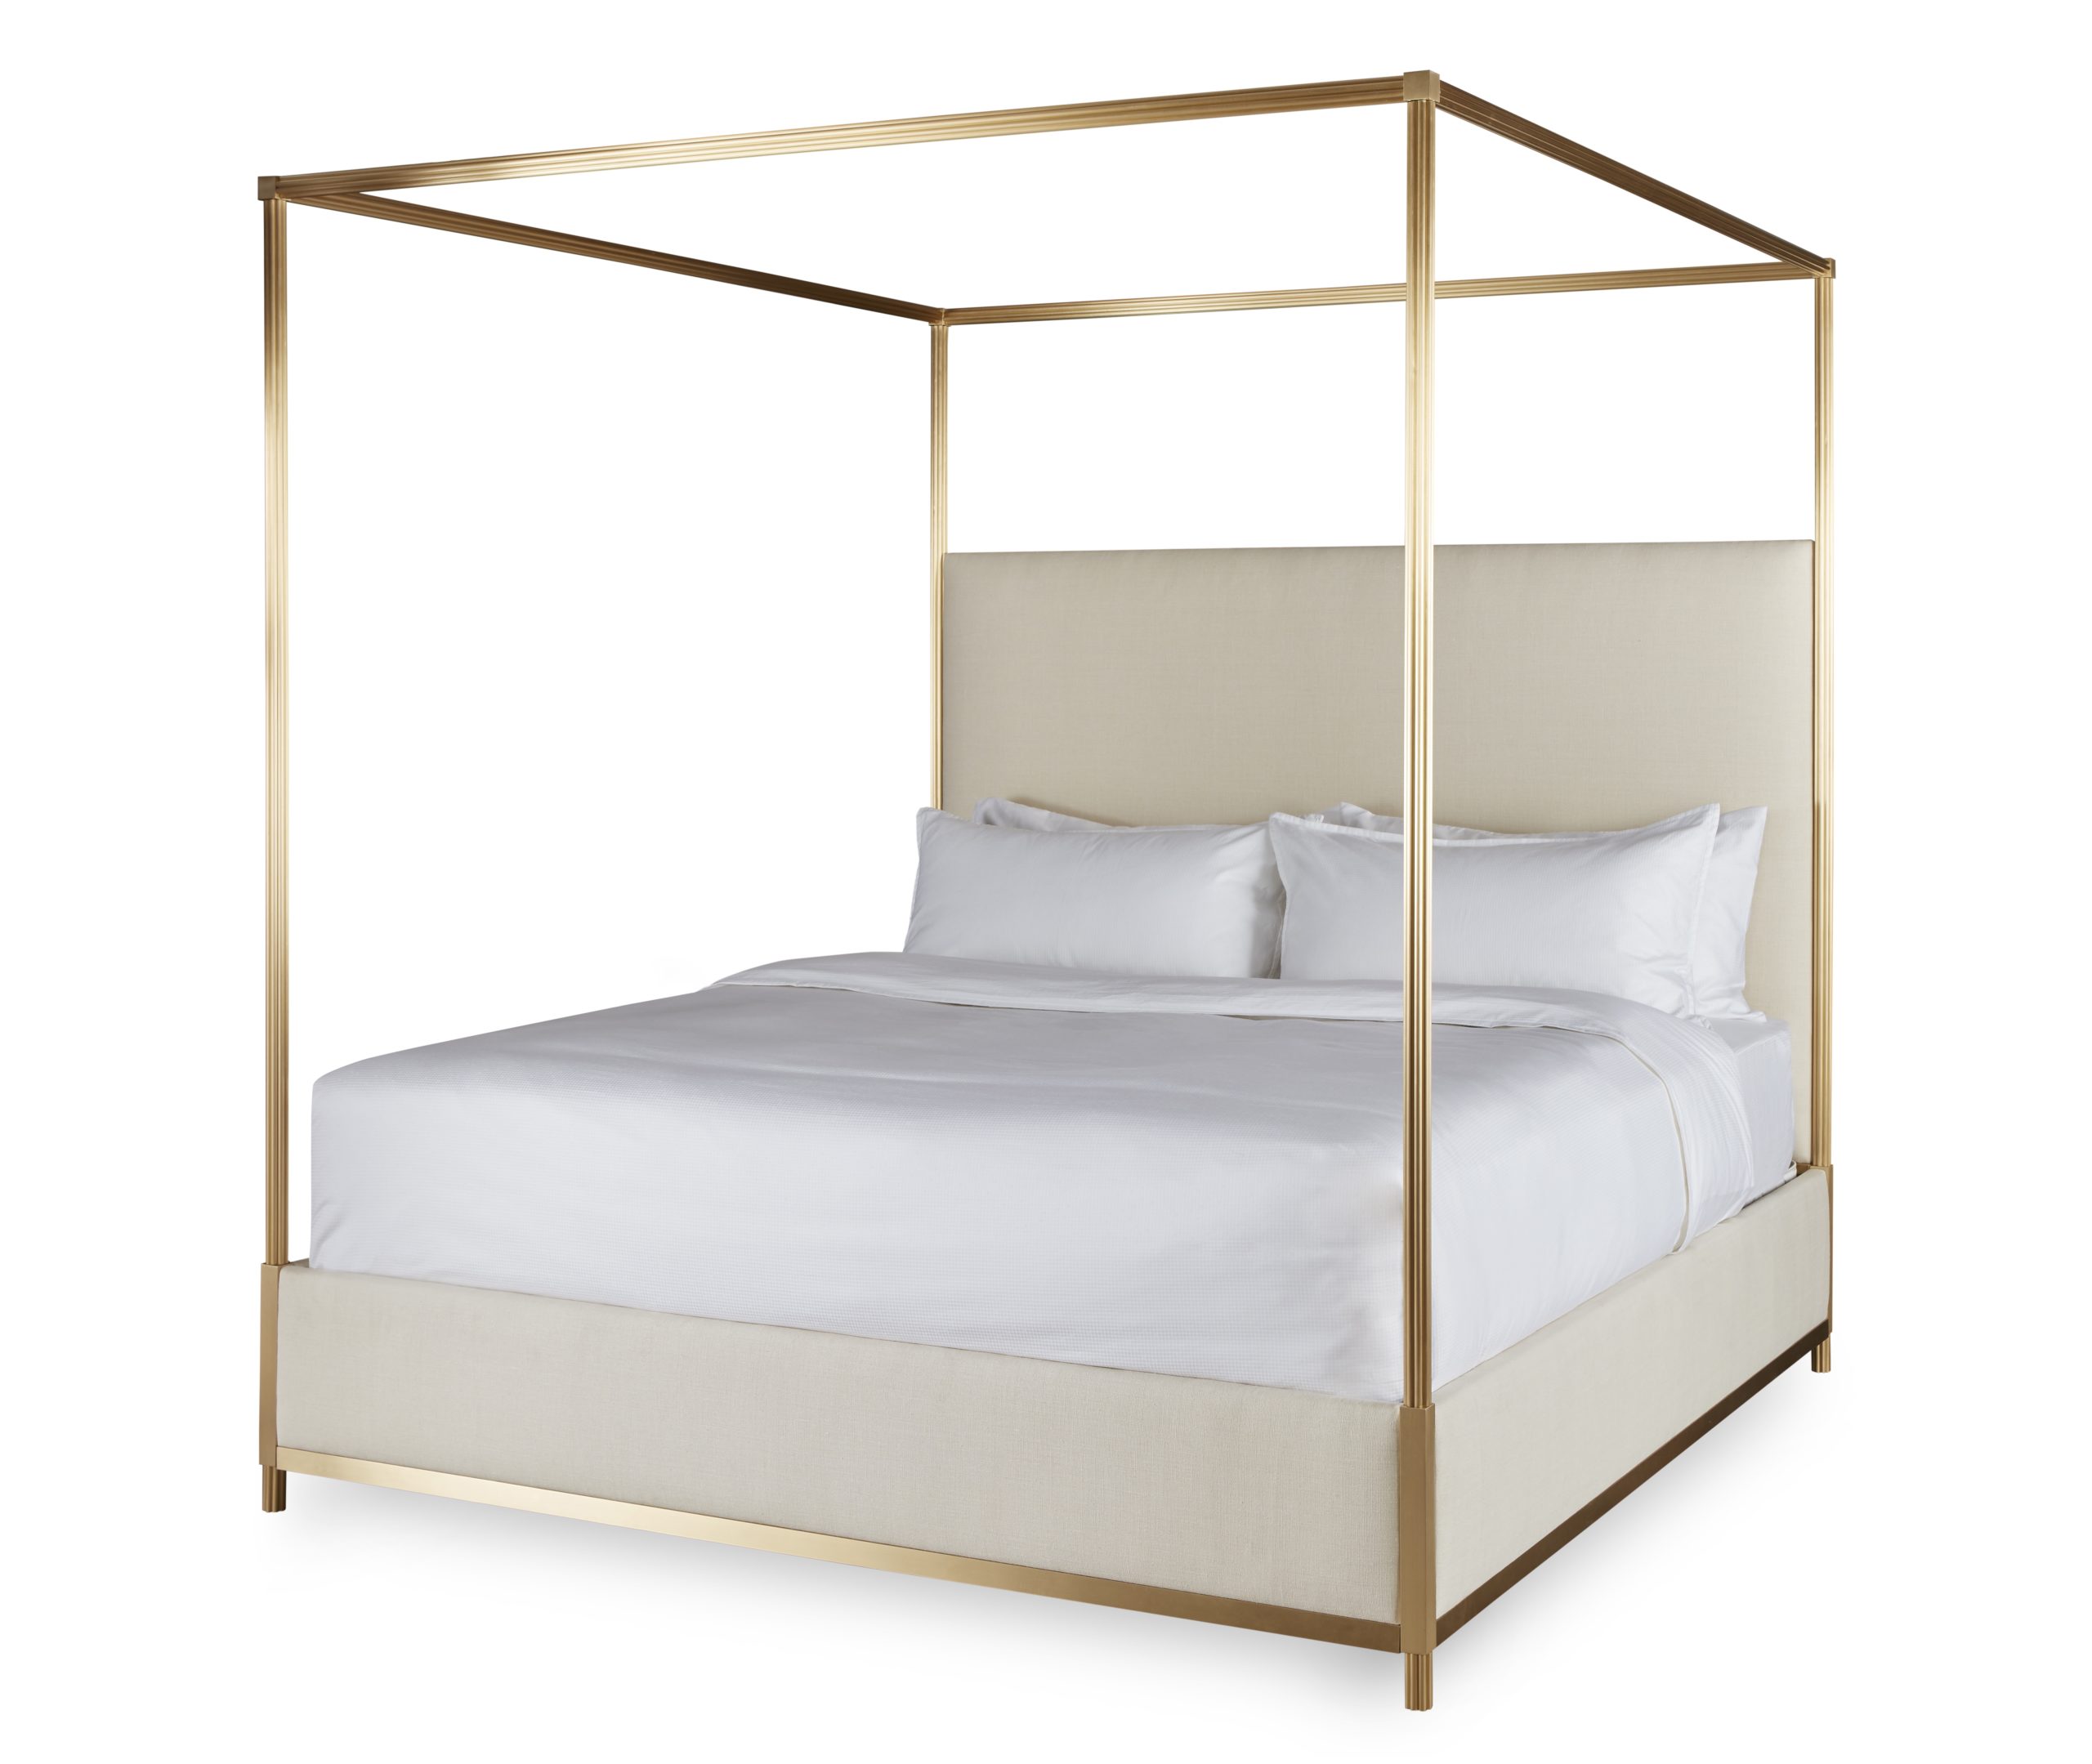 Baker_products_WNWN_allure_bed_BAA3221_FRONT_3QRT-scaled-2